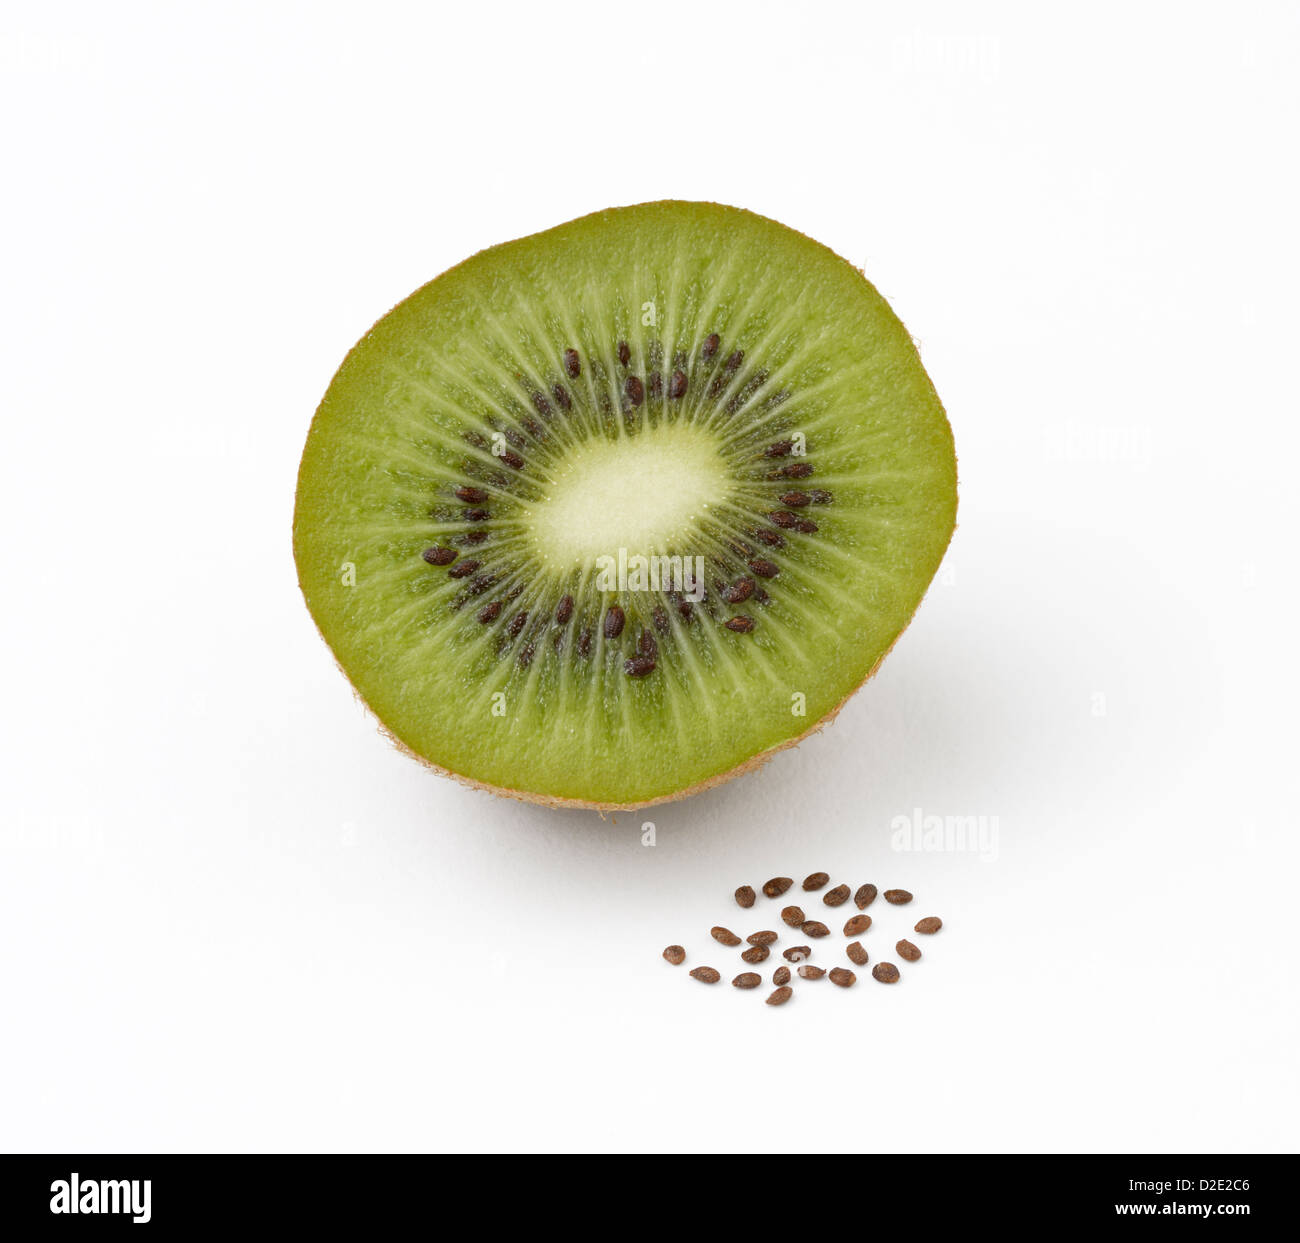 Kiwifruit, Actinidia deliciosoa, sliced open showing the seeds inside and with a pile of seeds in front Stock Photo